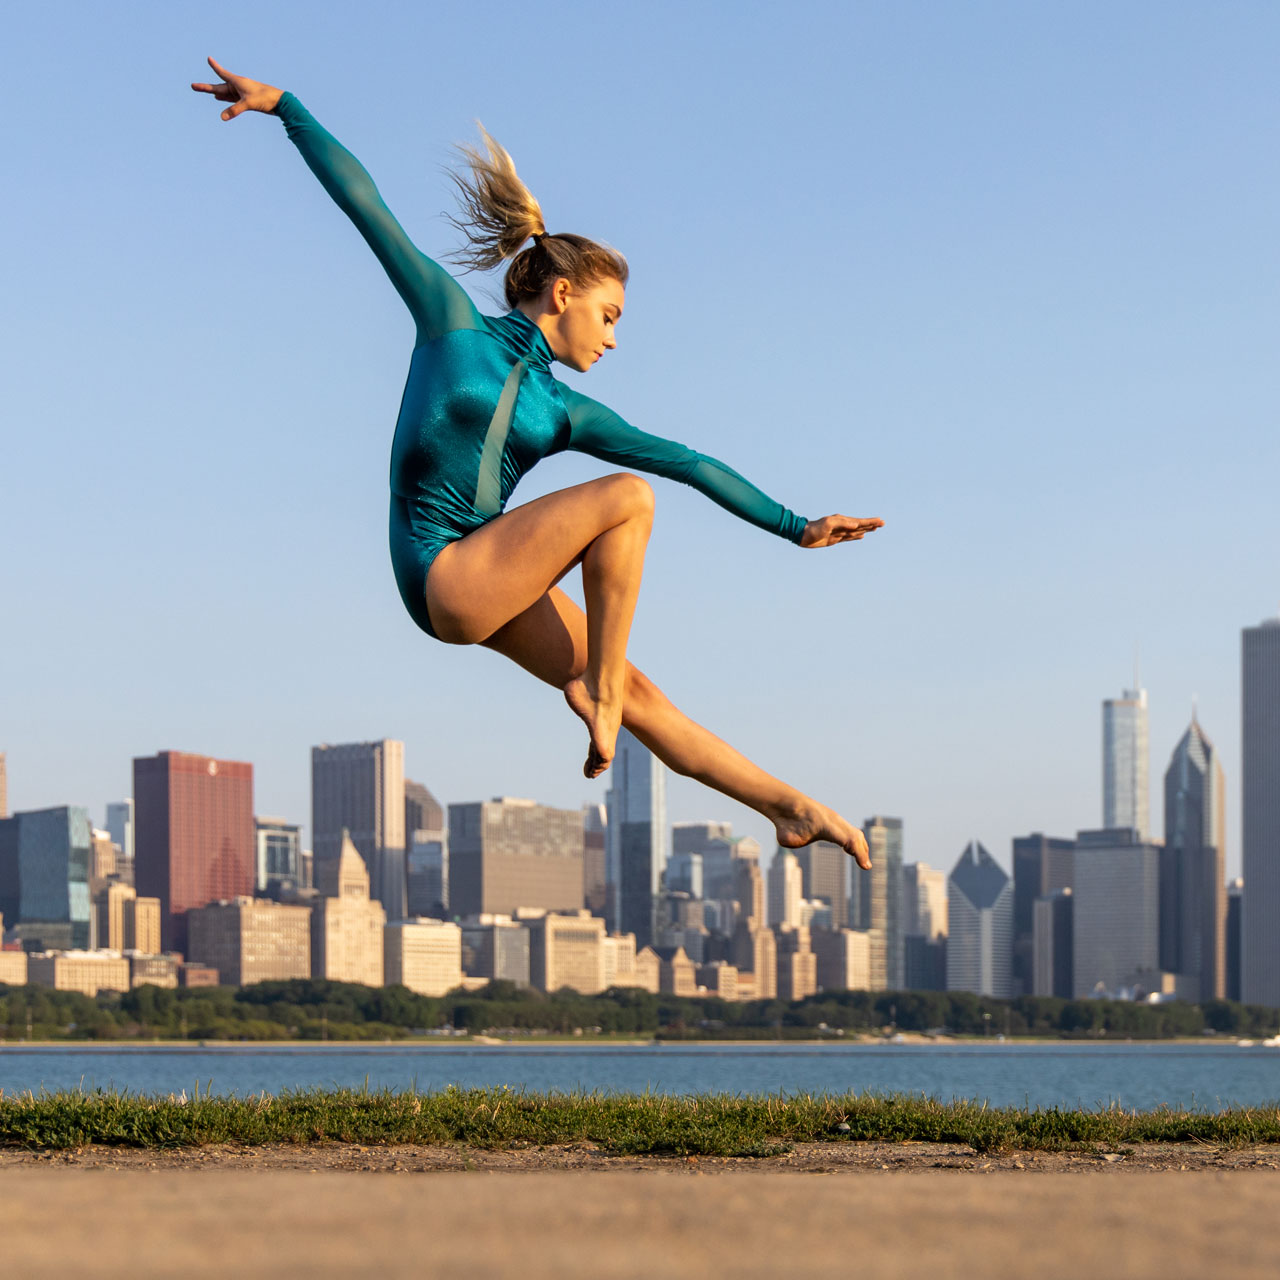 Female dancer in teal captured mid leap with the background of Chicago skyline for Exulting Images outdoor dance photoshoot